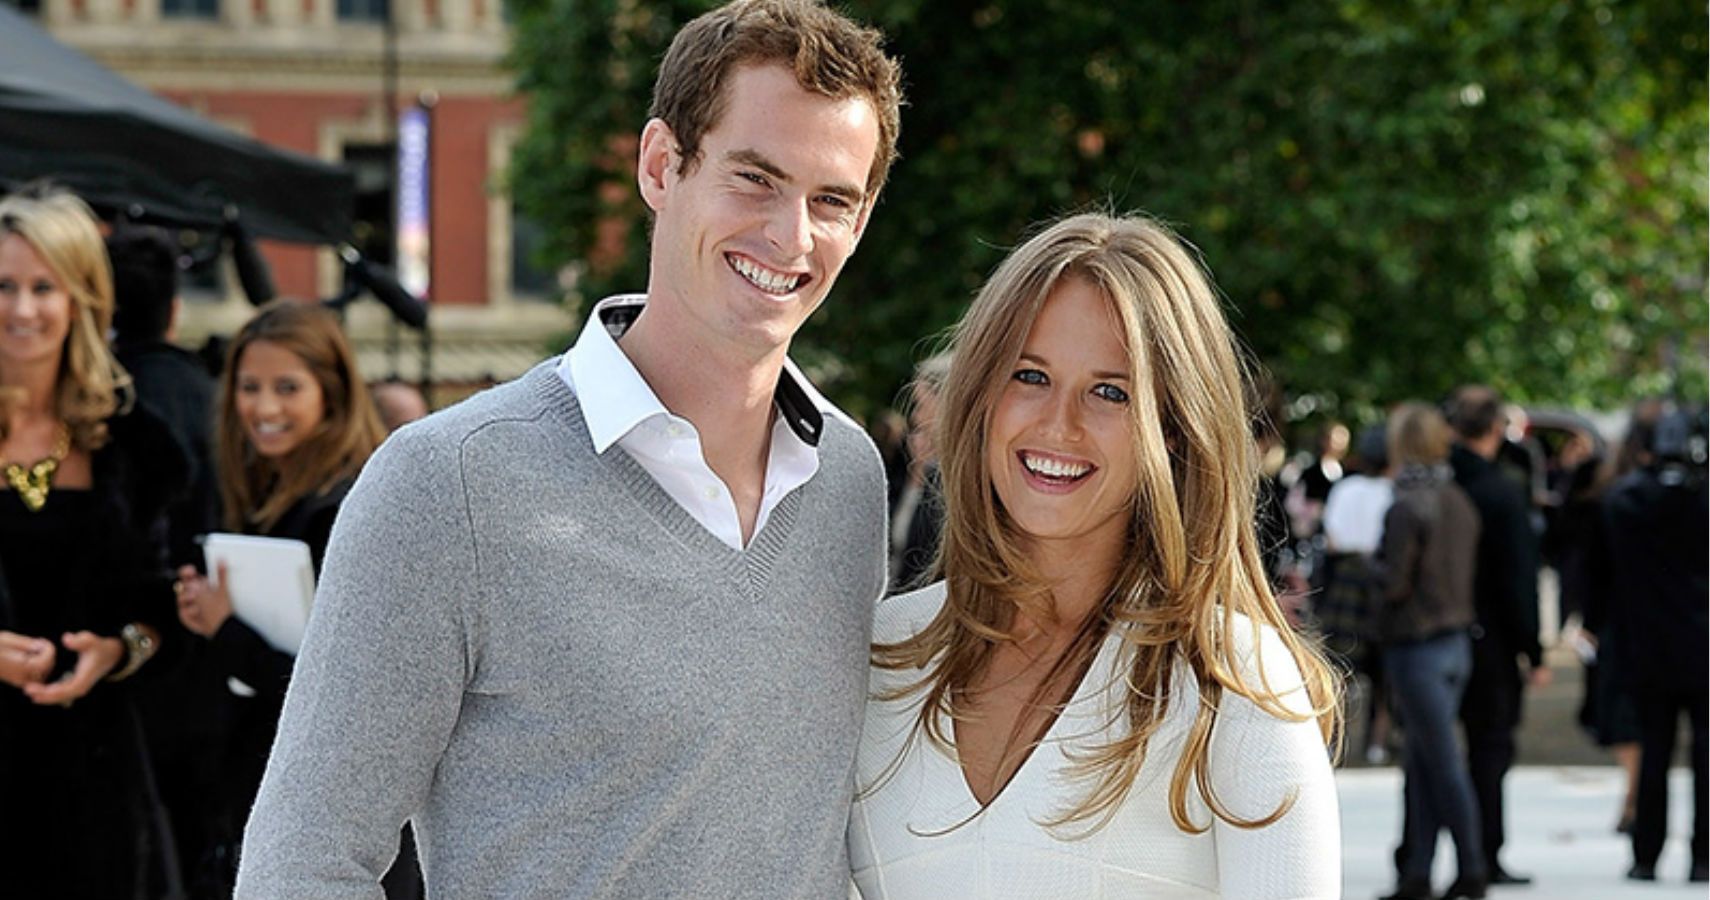 Andy Murray And Wife Kim Sears Reveal Third Pregnancy At Wimbledon